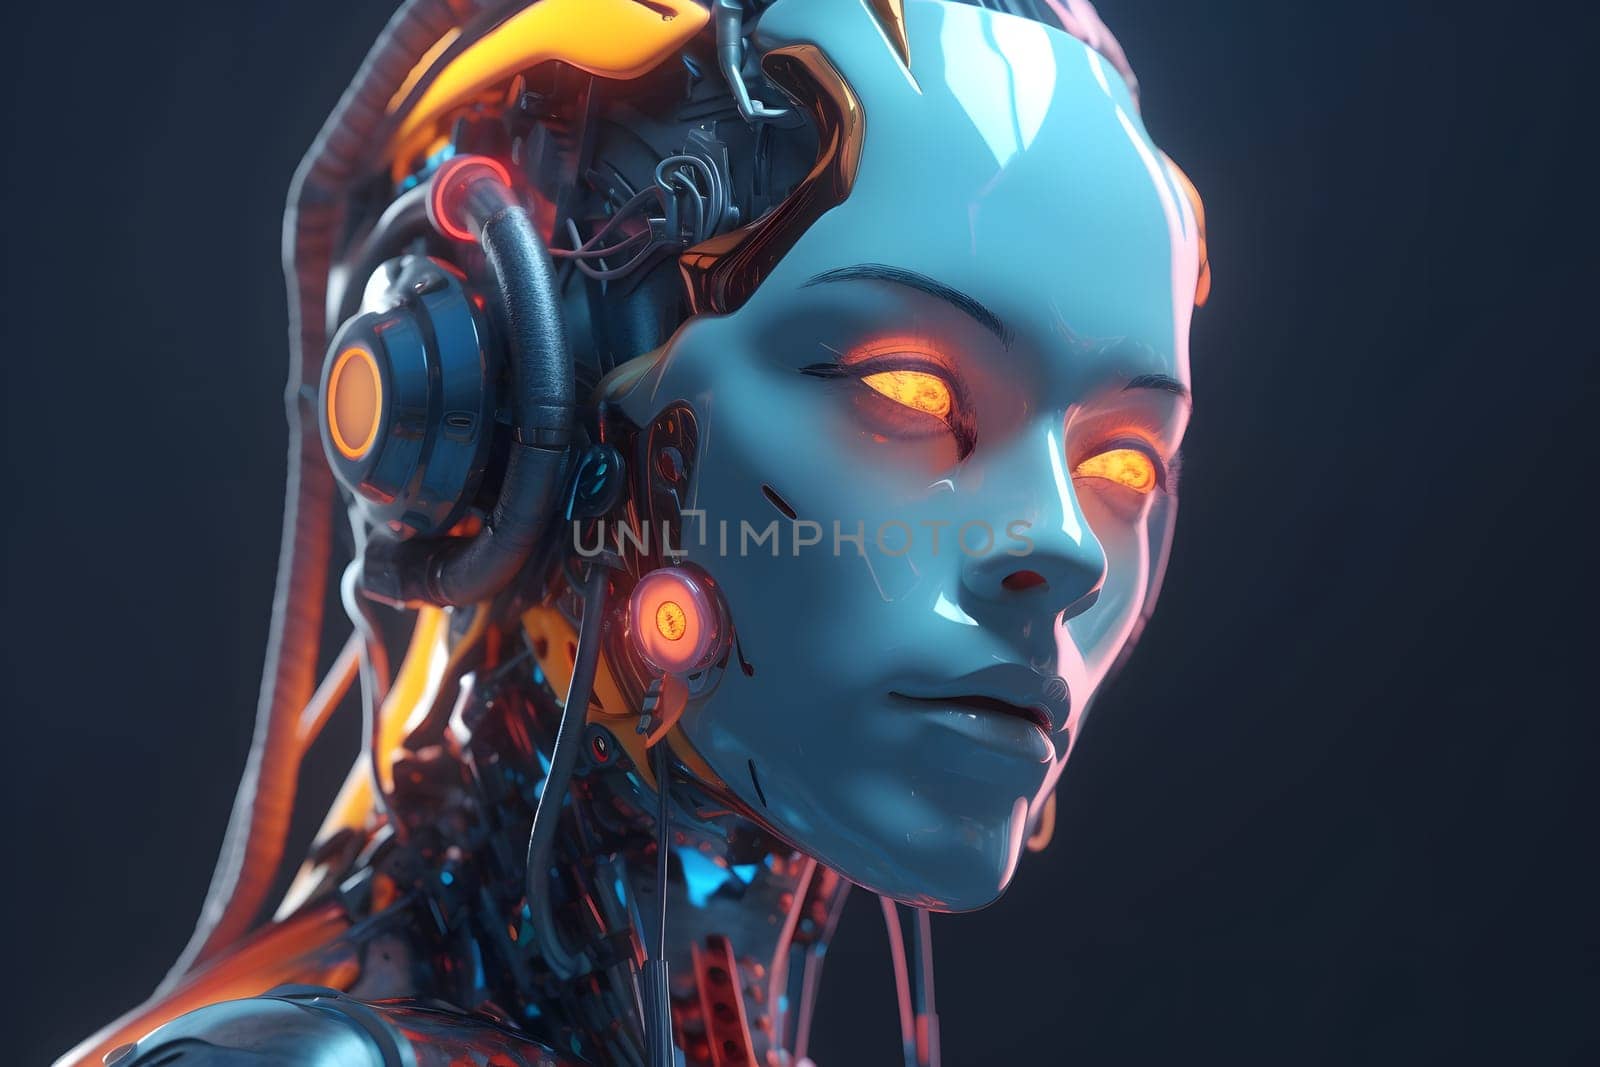 anthropomorphic humanoid female robot head portrait on dark background in blue tones, neural network generated art. Digitally generated image. Not based on any actual person, scene or pattern.